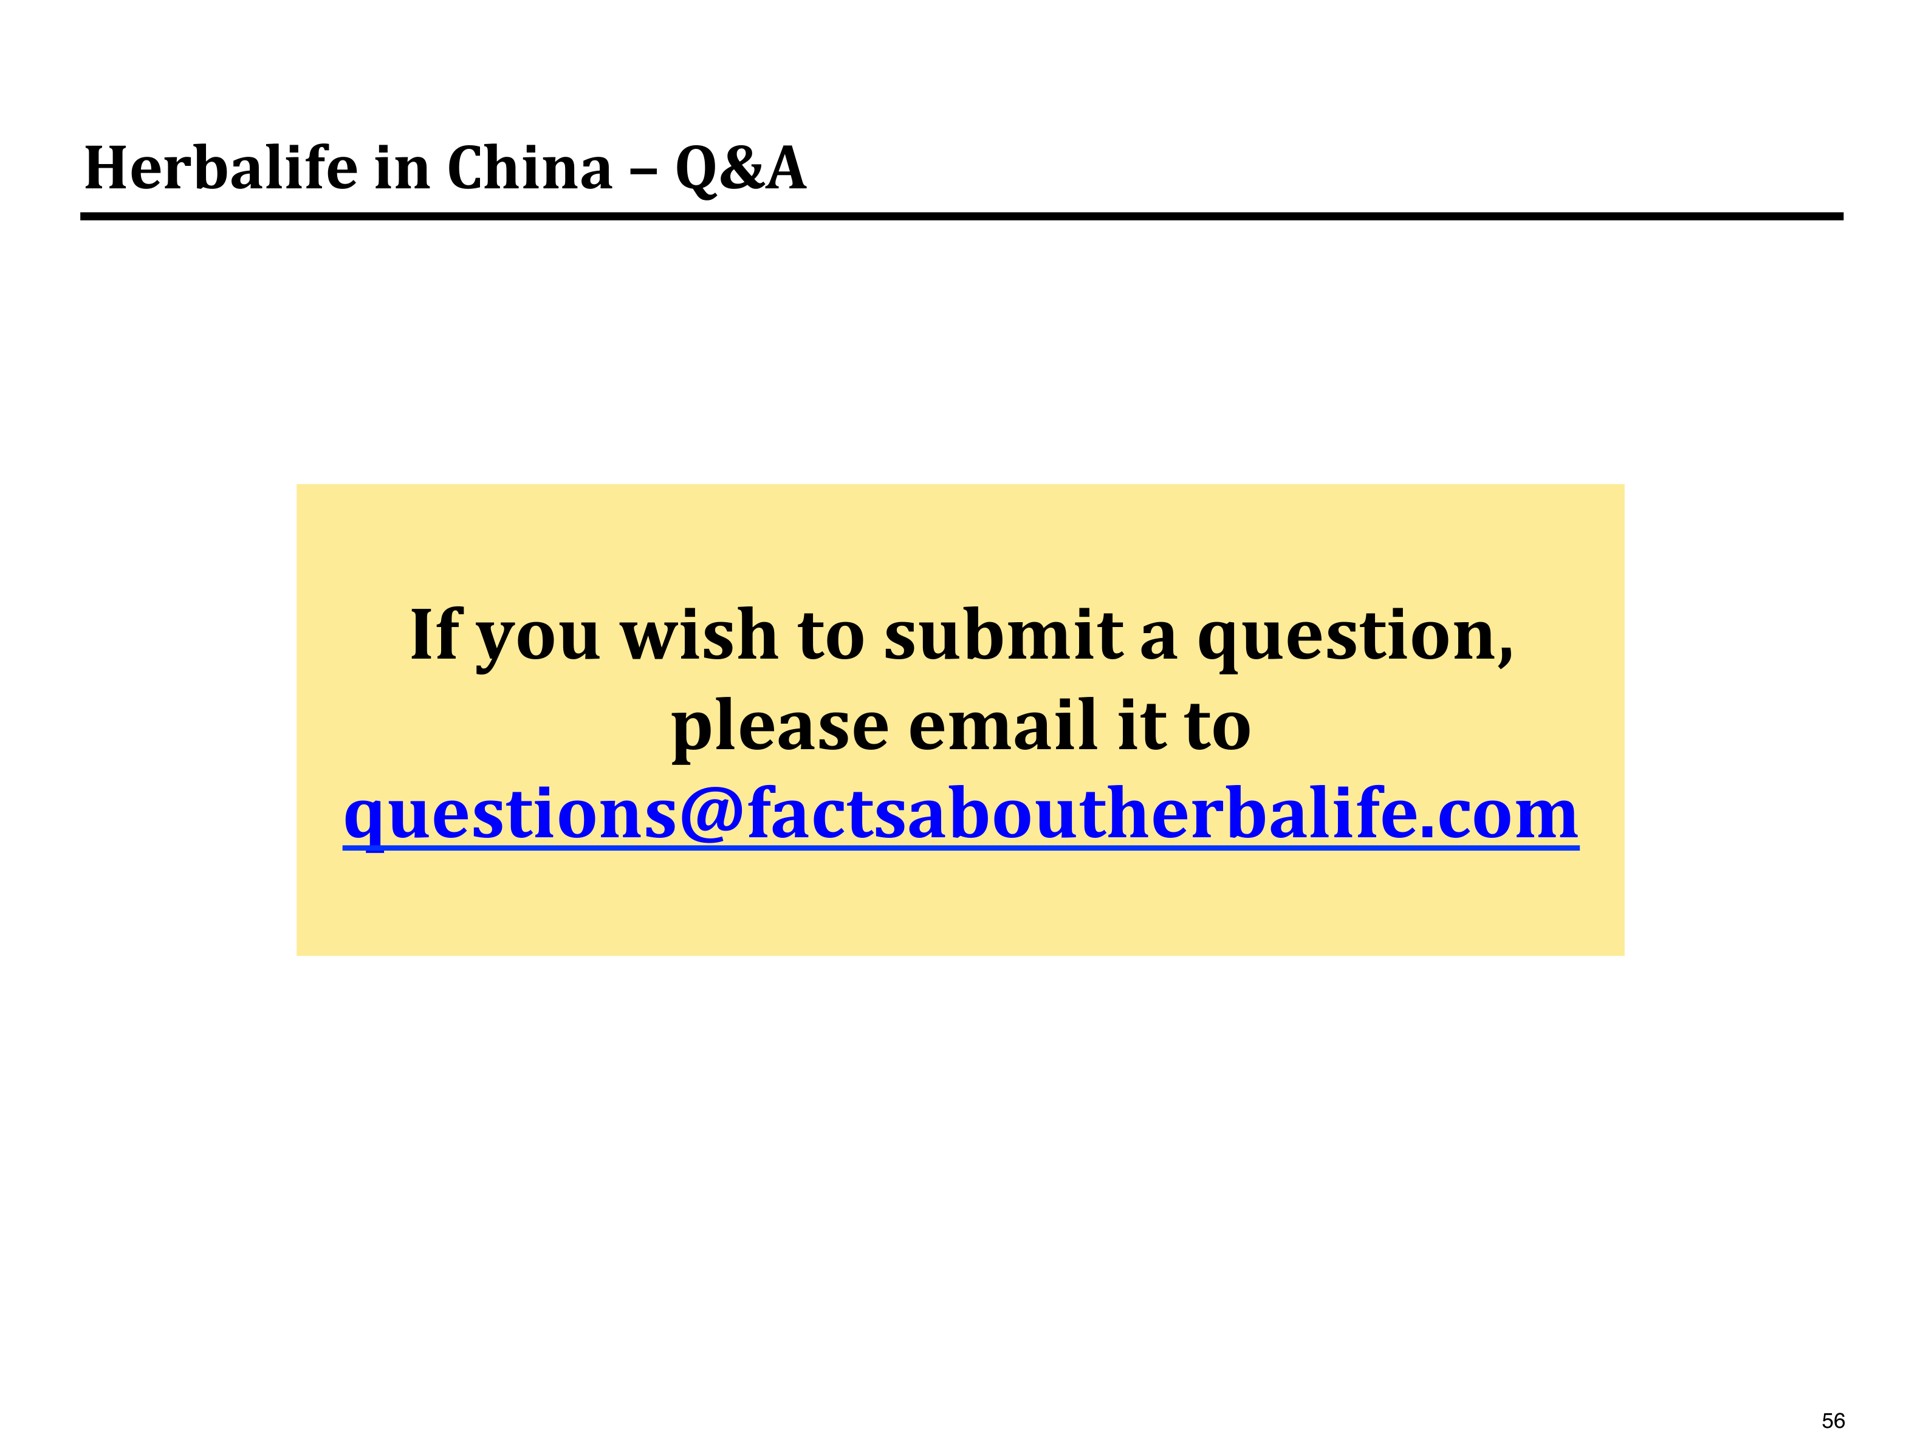 in china a if you wish to submit a question please it to questions | Pershing Square